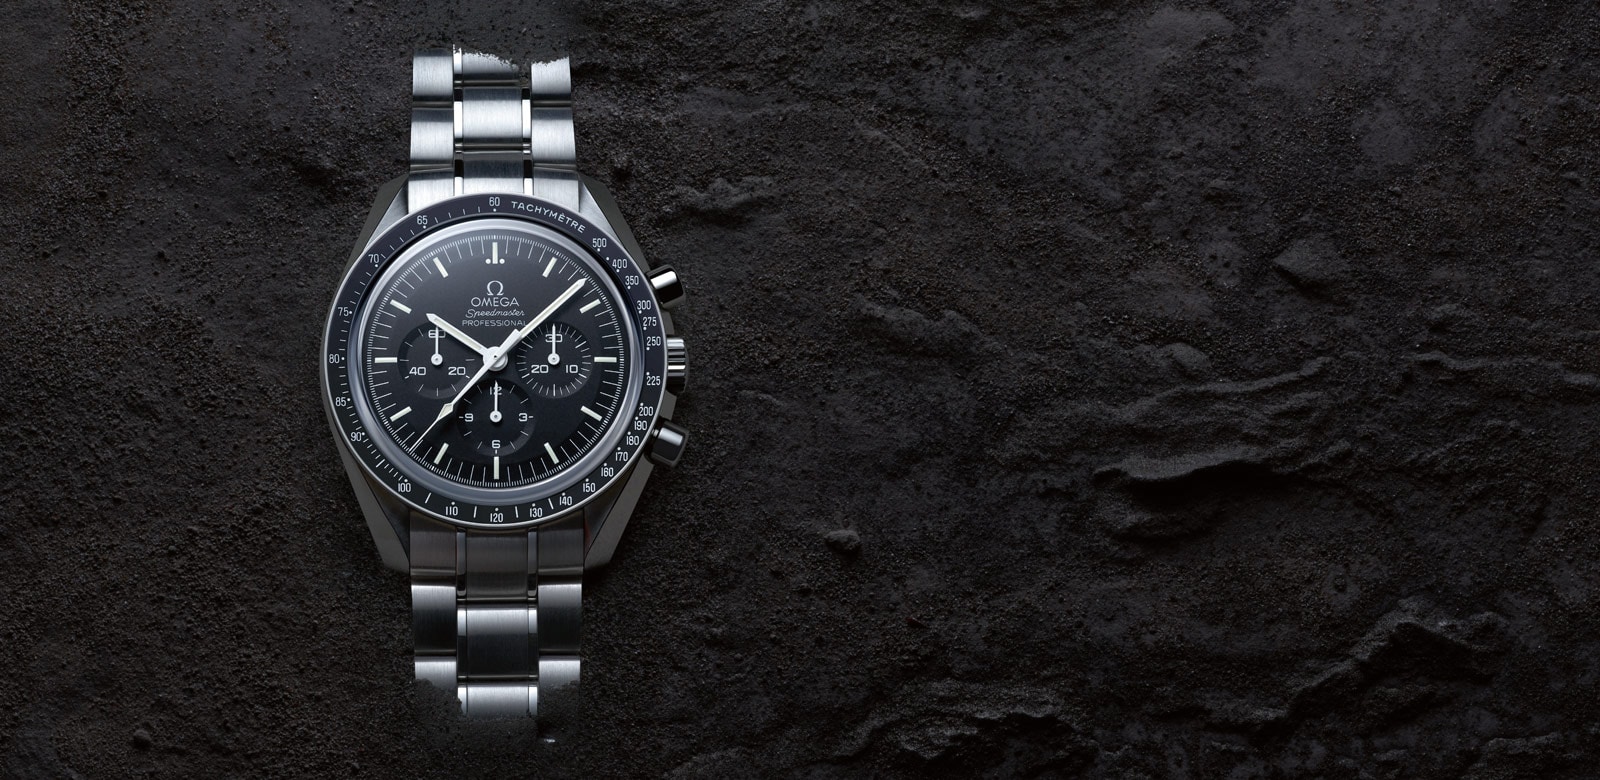 How To Tell If A Breitling Is Real Or Fake